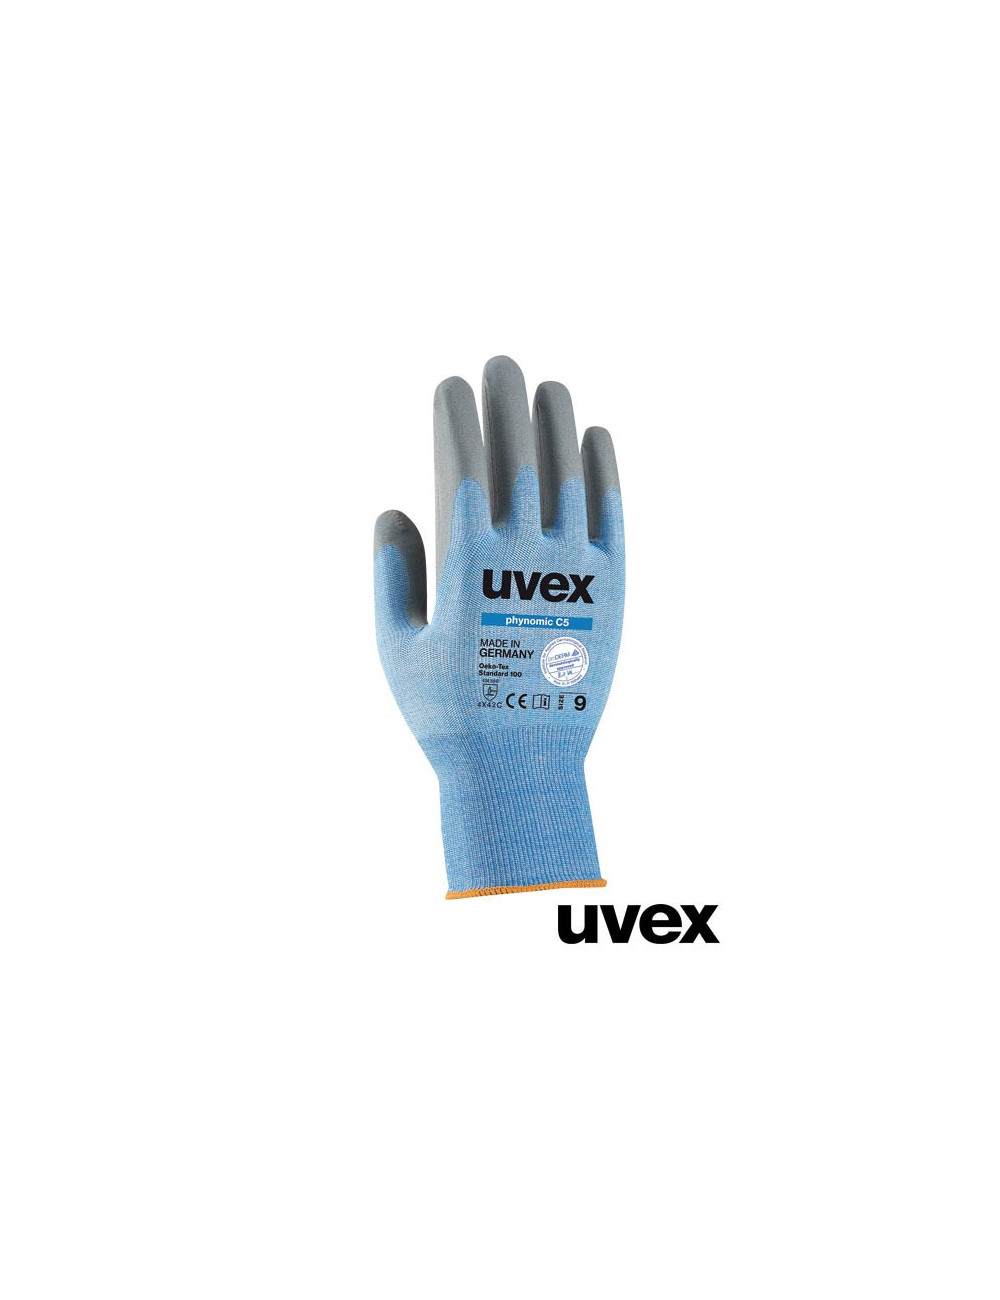 Protective gloves ns blue-gray Uvex Ruvex-nomicc5